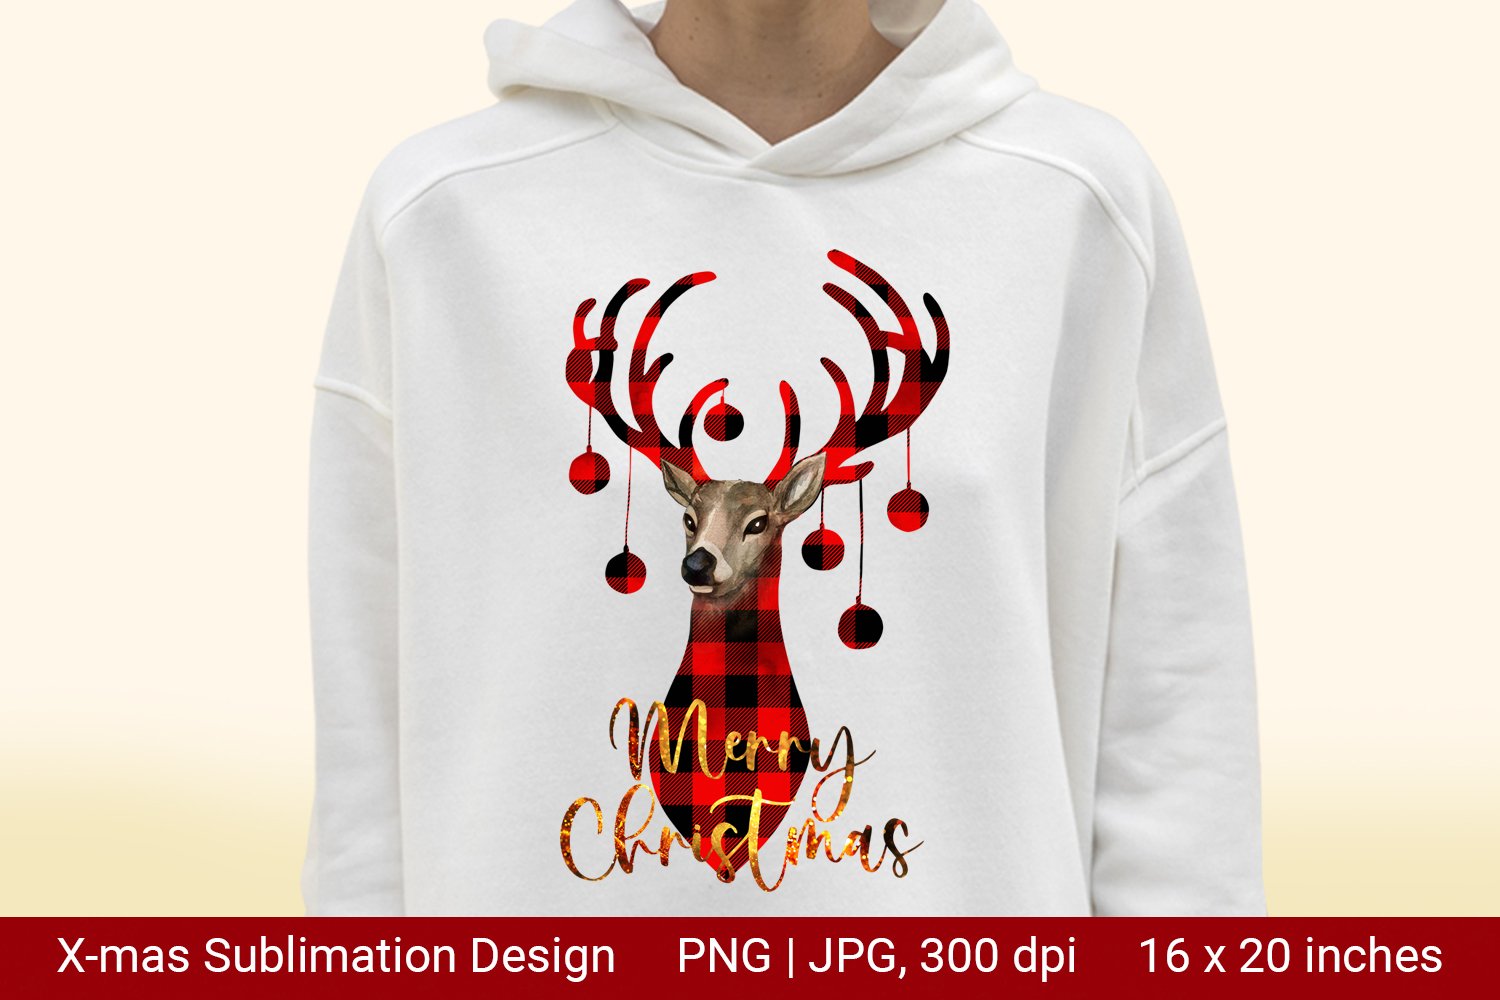 White hoodie with bright red Christmas deer print.